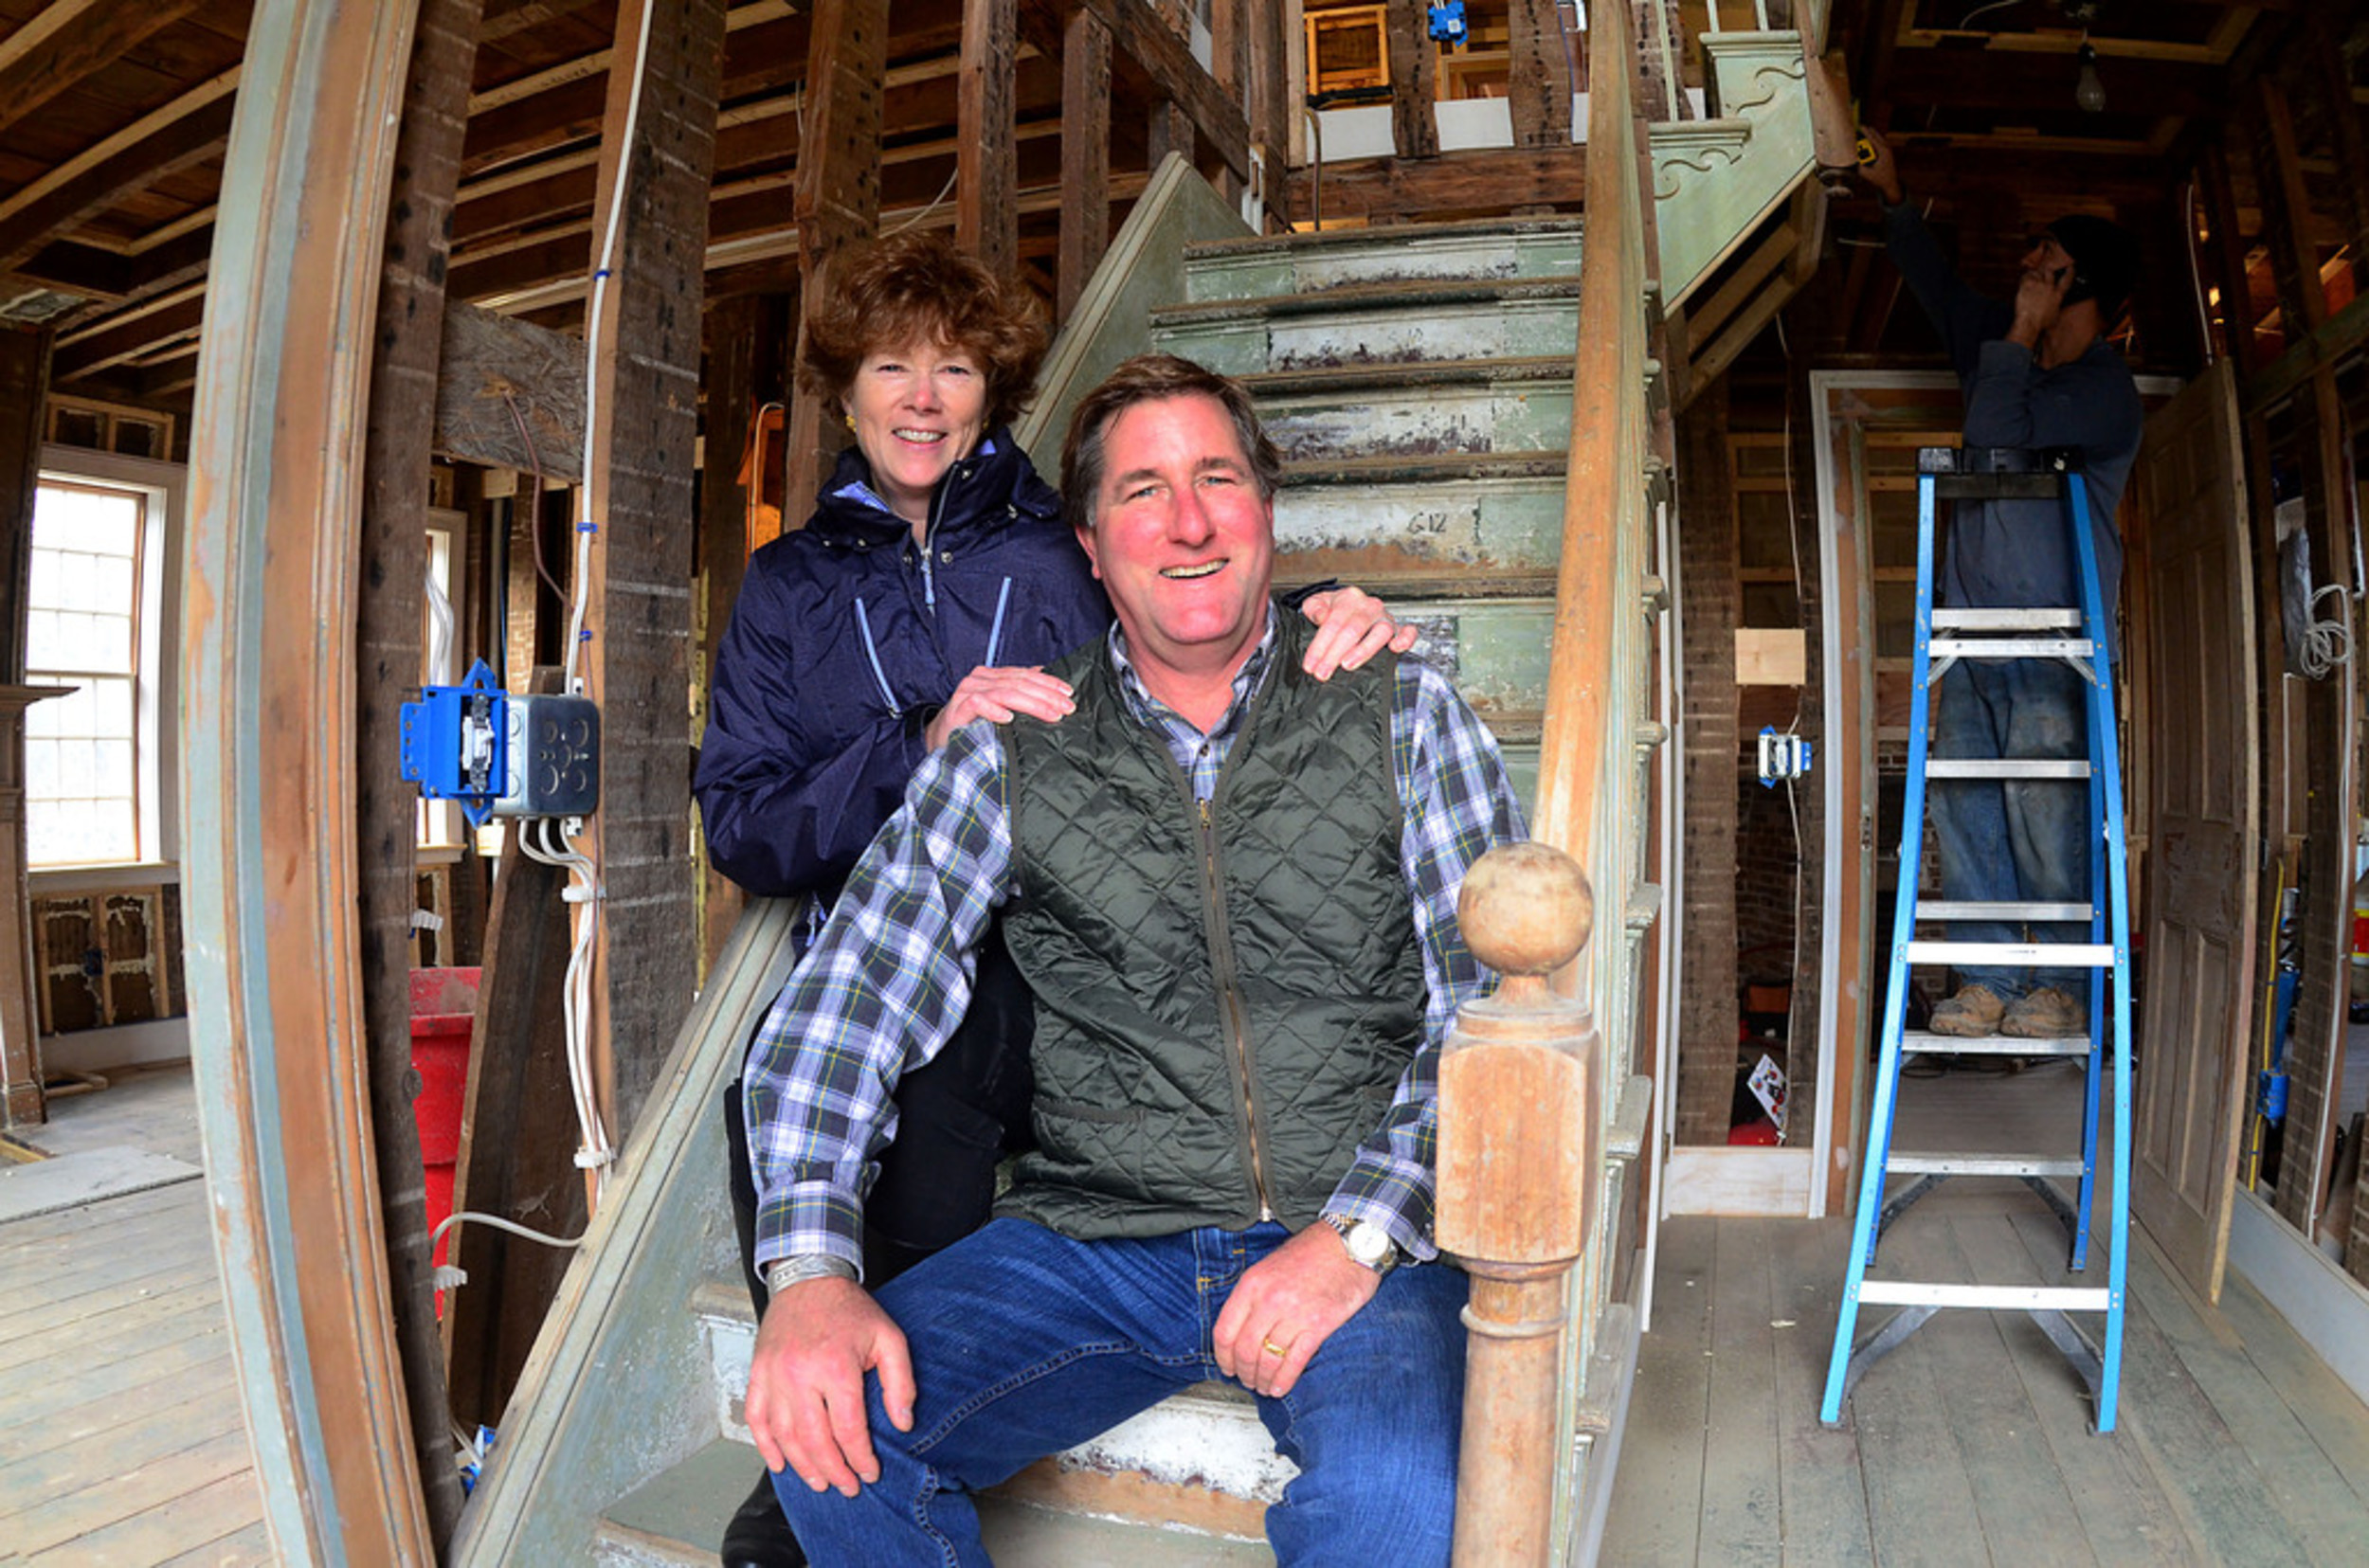 Dora Atwater Millikin and Trip Millikin sit on the main staircase of the 1835 house that they moved from Buzzards Bay Brewery to their Main Road property. Some of the posts and beams date back to an even earlier 1709 house.